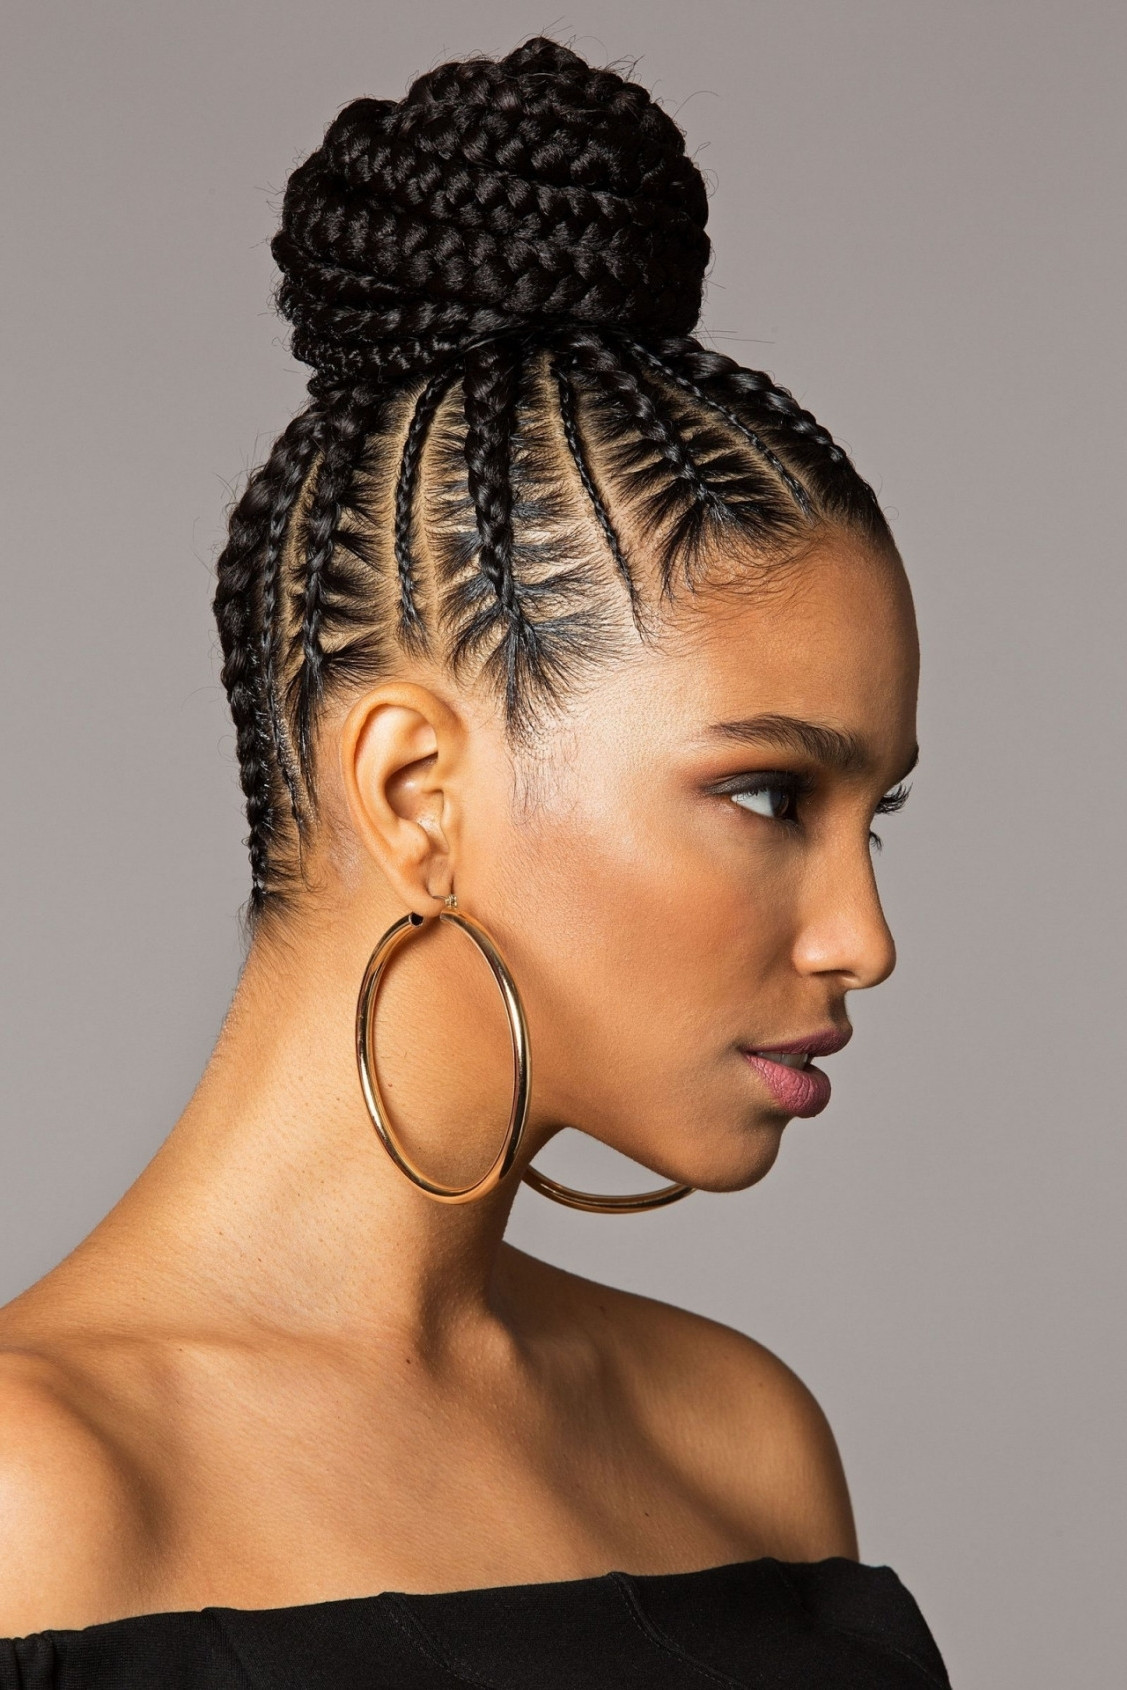 Girl Cornrows Hairstyles
 2019 Latest Braided Hairstyles For Black Woman